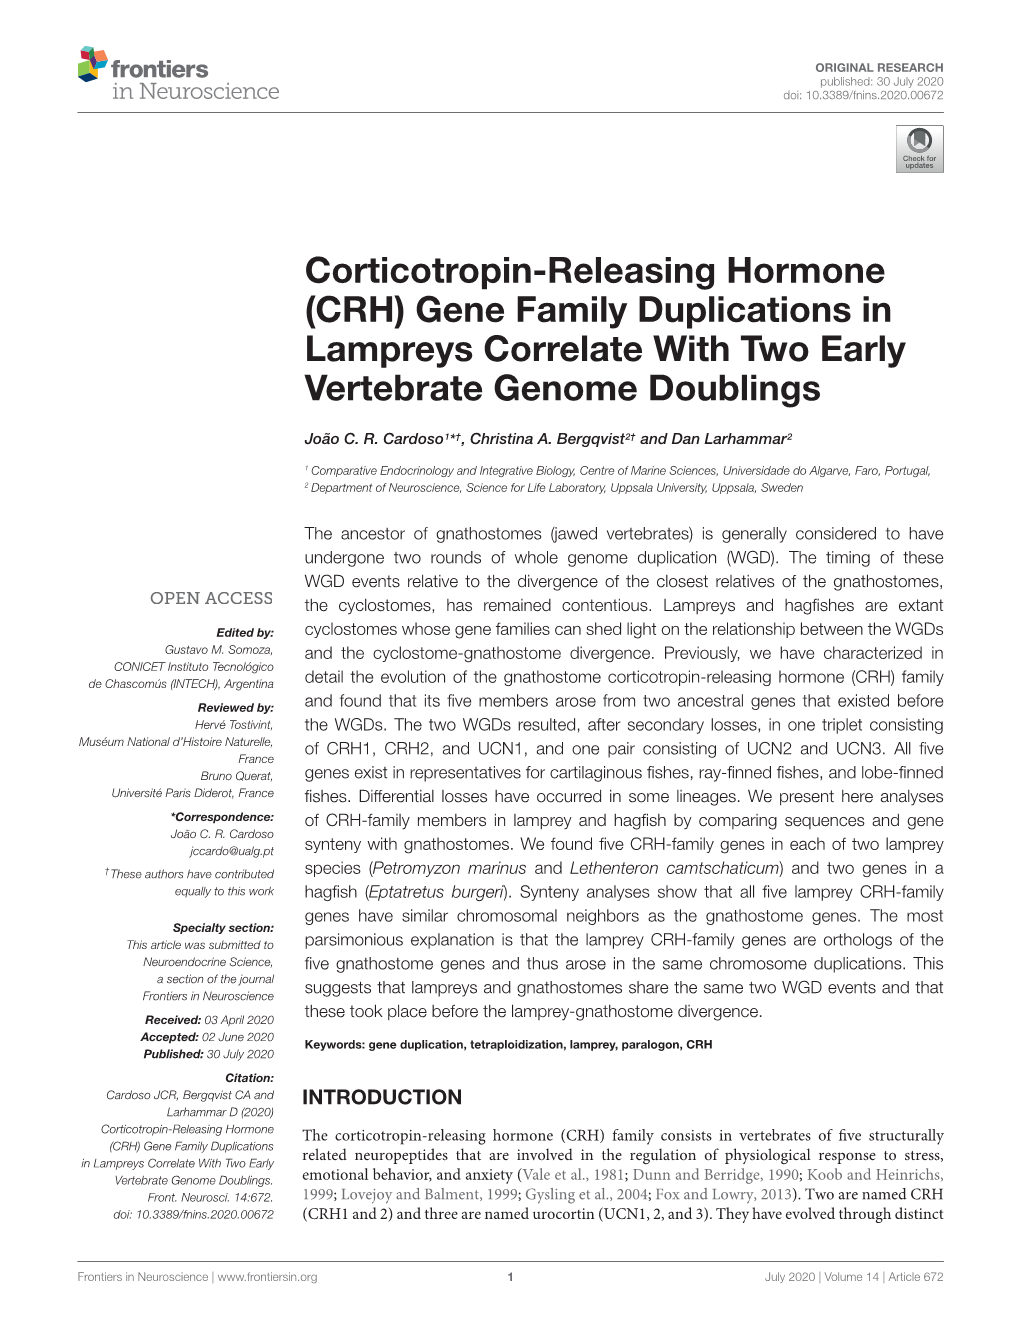 Corticotropin-Releasing Hormone (CRH) Gene Family Duplications in Lampreys Correlate with Two Early Vertebrate Genome Doublings